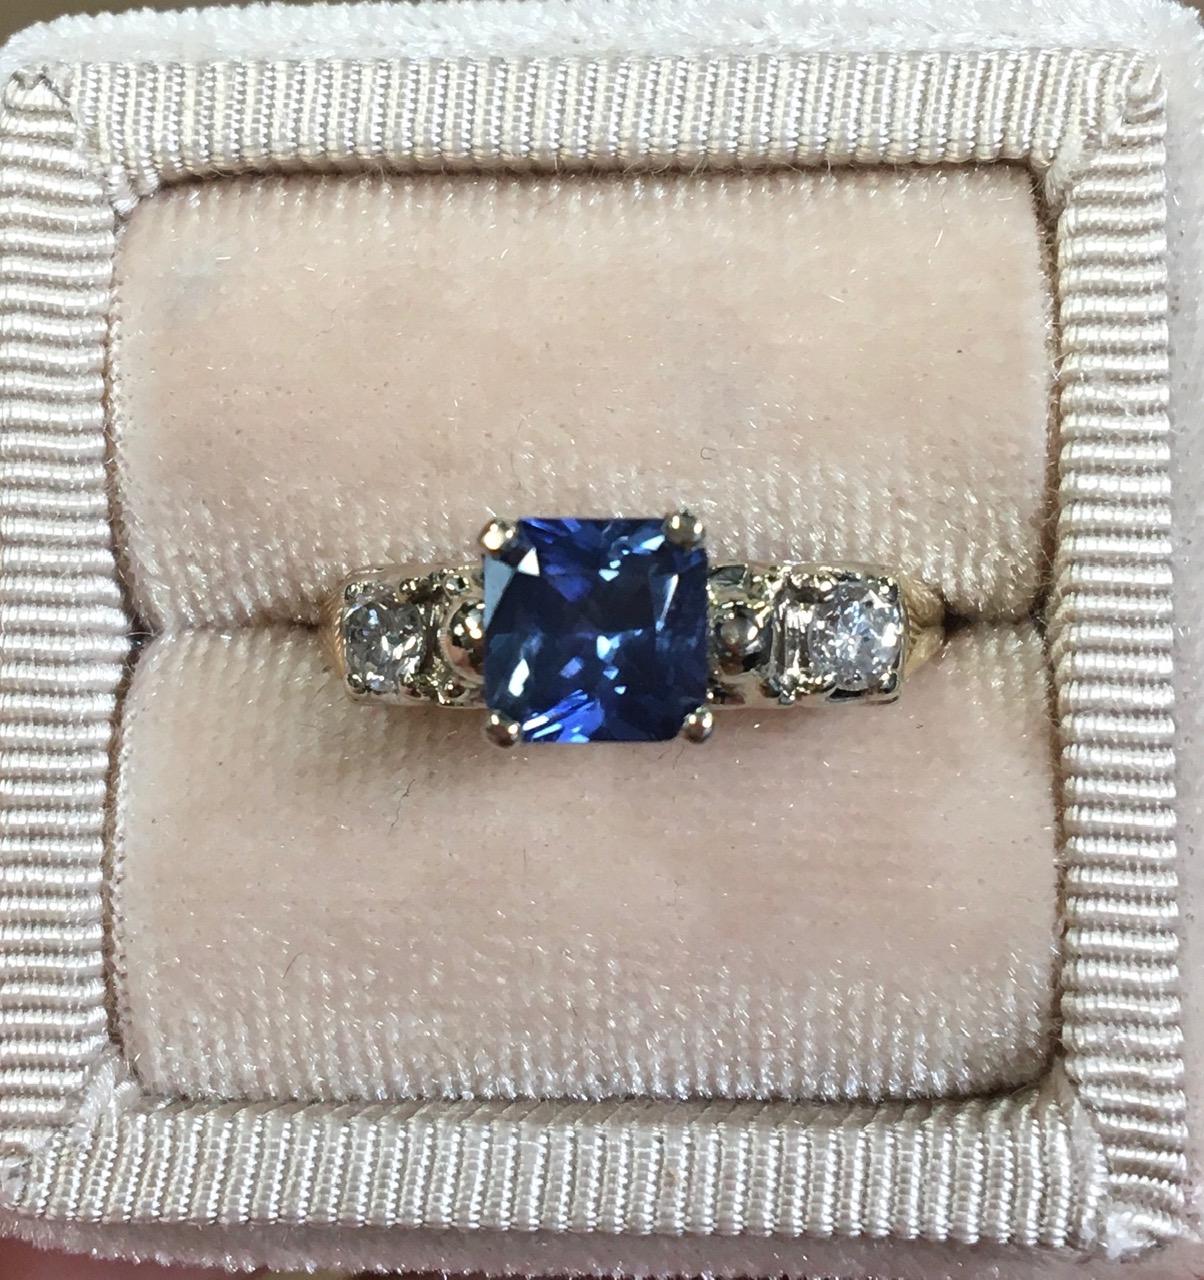 14K yellow and white gold blue sapphire and diamond ring. The ring features a square princess cut earth mined blue sapphire weighing 1.32 carats. There are 2 round brilliant cut diamond accents measuring about 3mm and weighing about .20cts total.